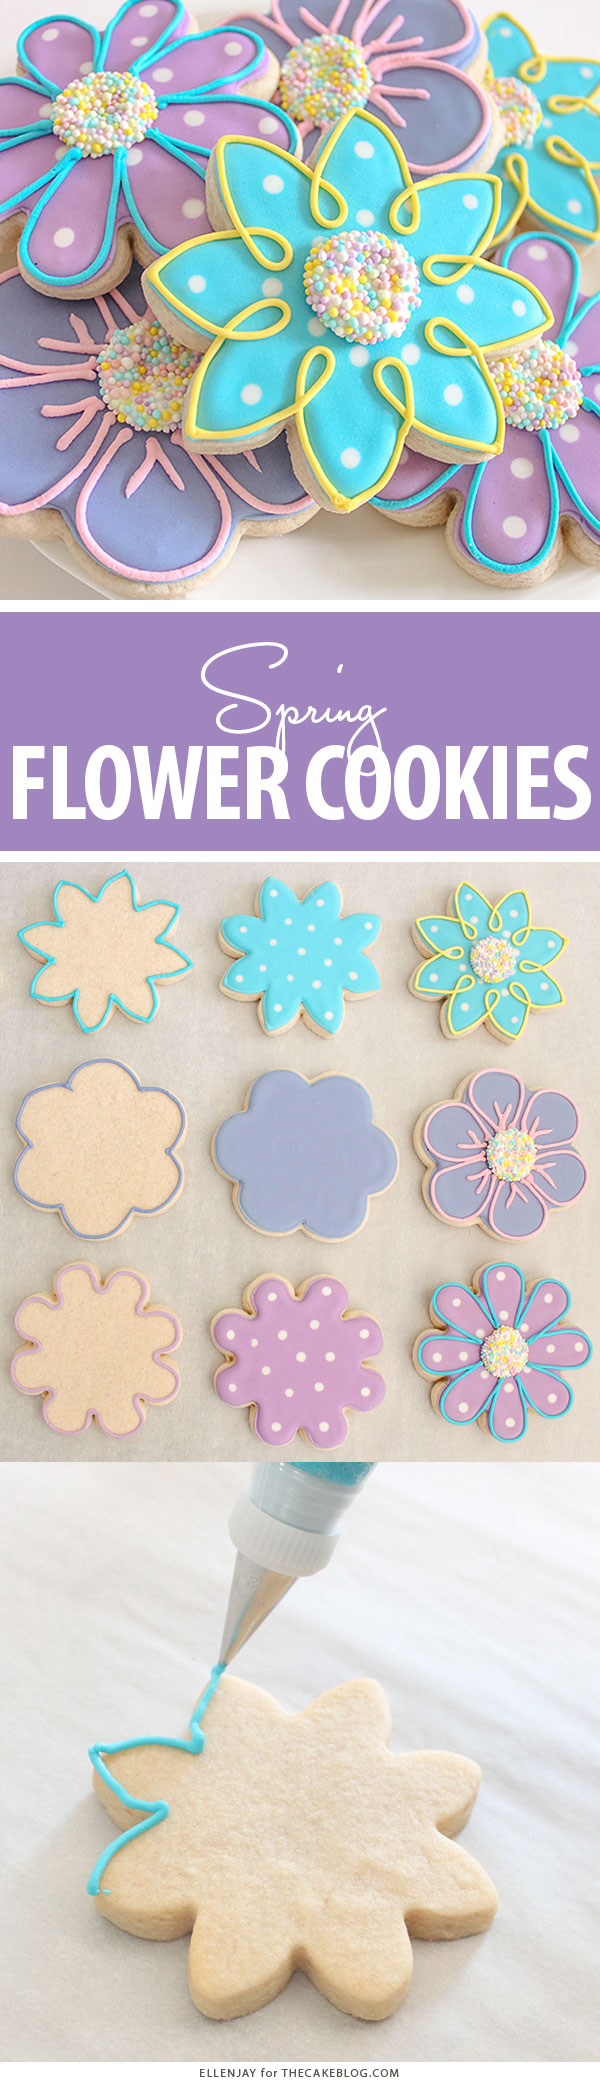 How to make Flower Sugar Cookies | by ellenJAY for TheCakeBlog.com